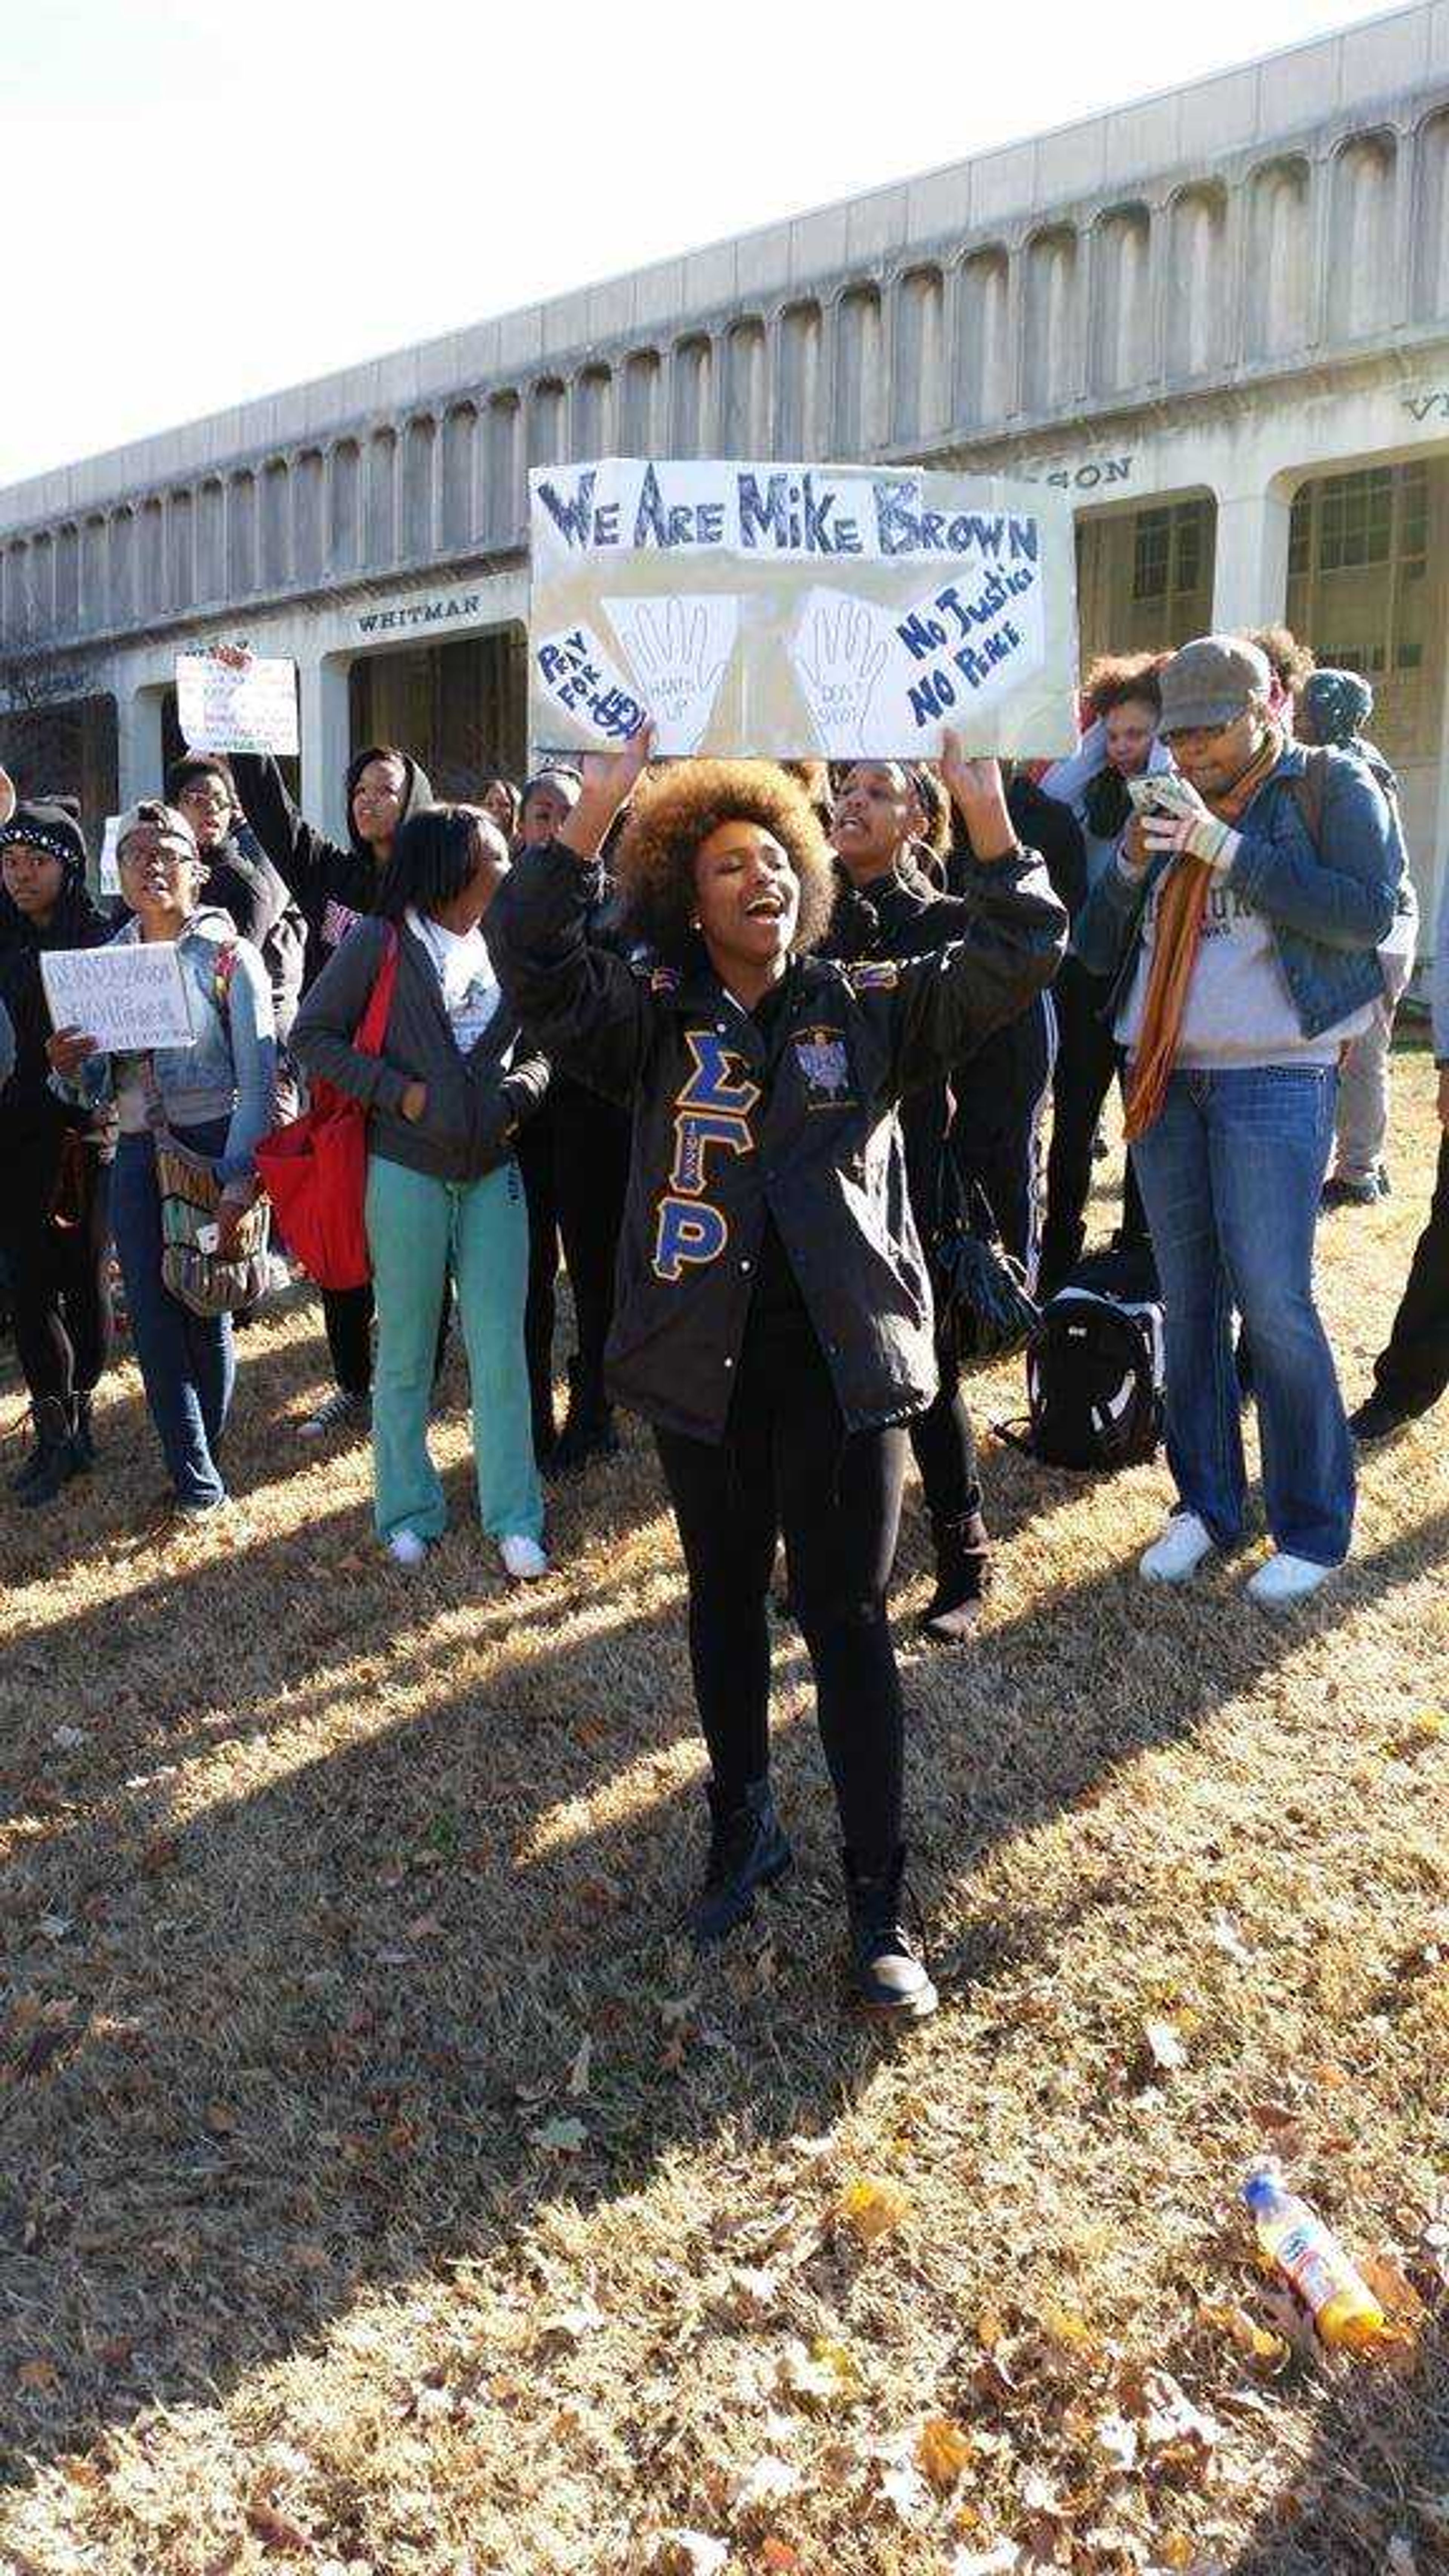 Students led peaceful protest in light of grand jury decision